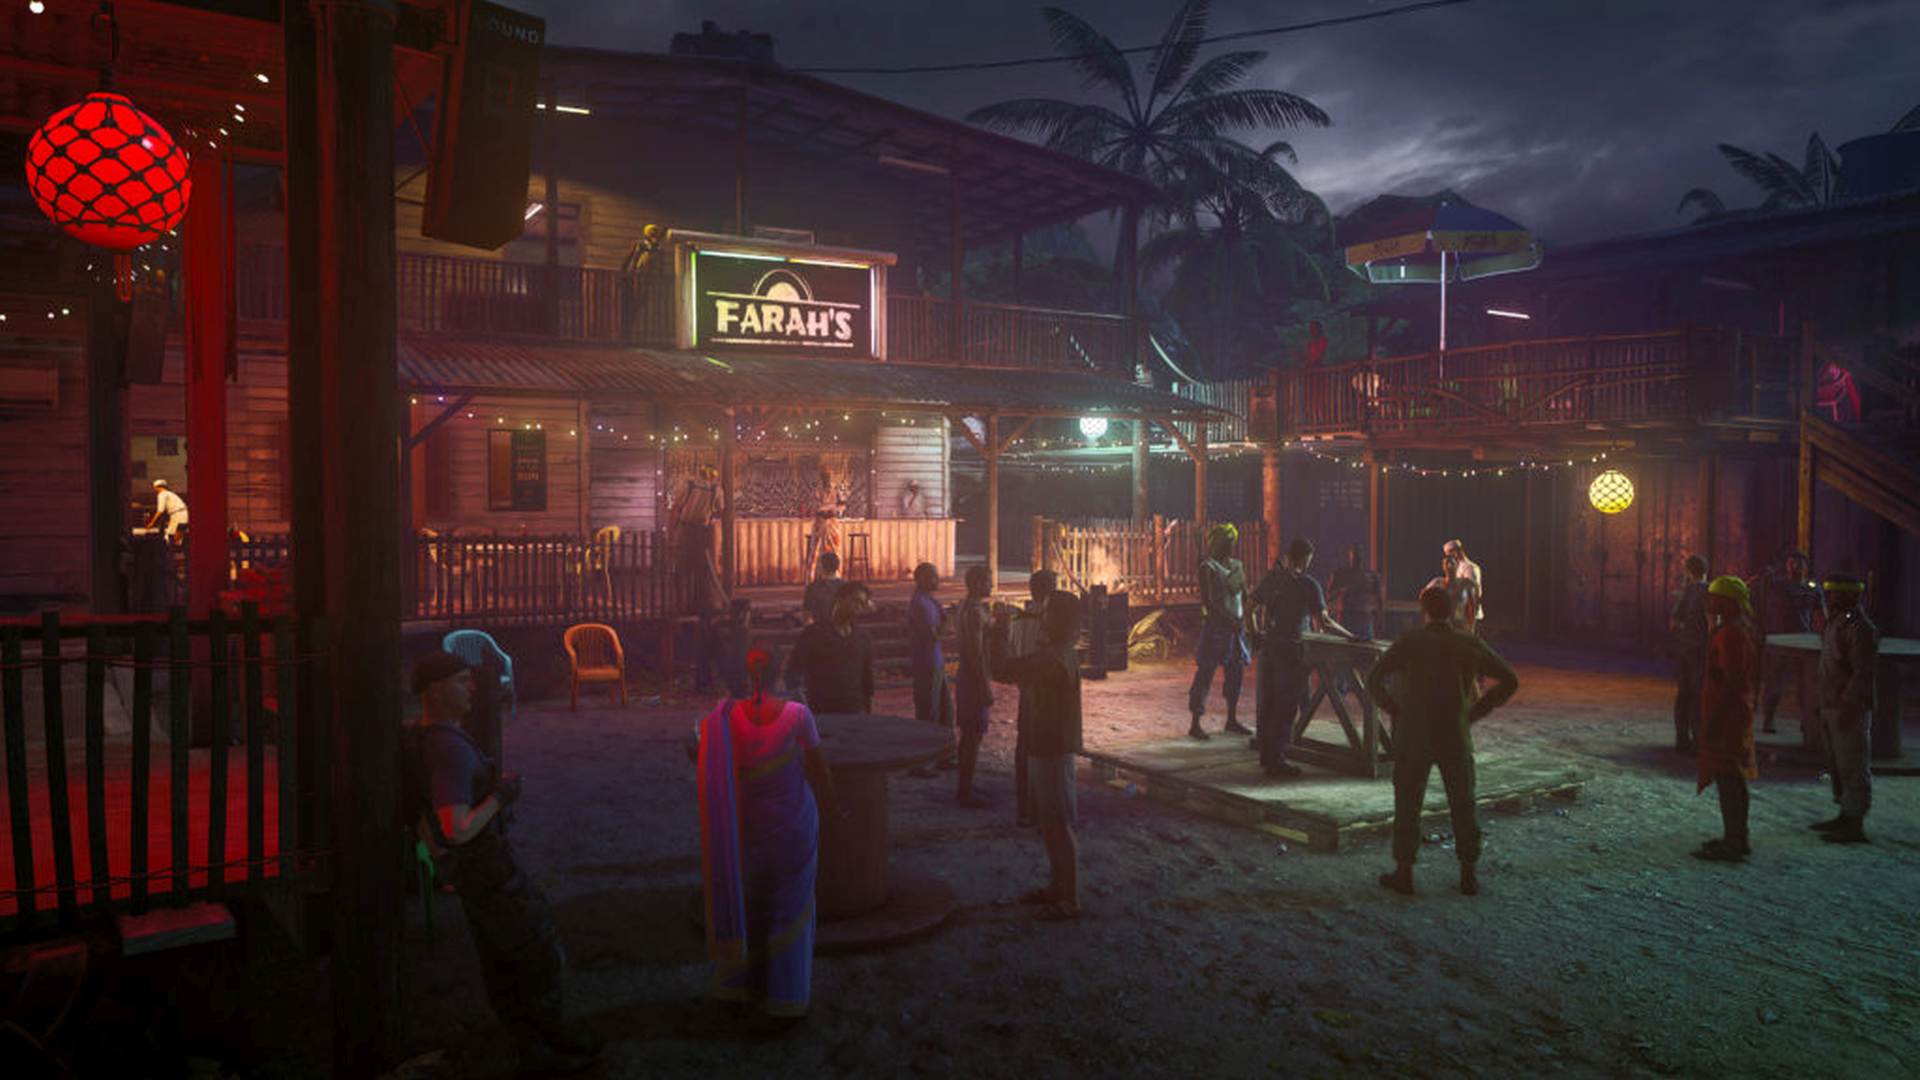 Hitman 3 gets new locale Ambrose Island today – Destructoid